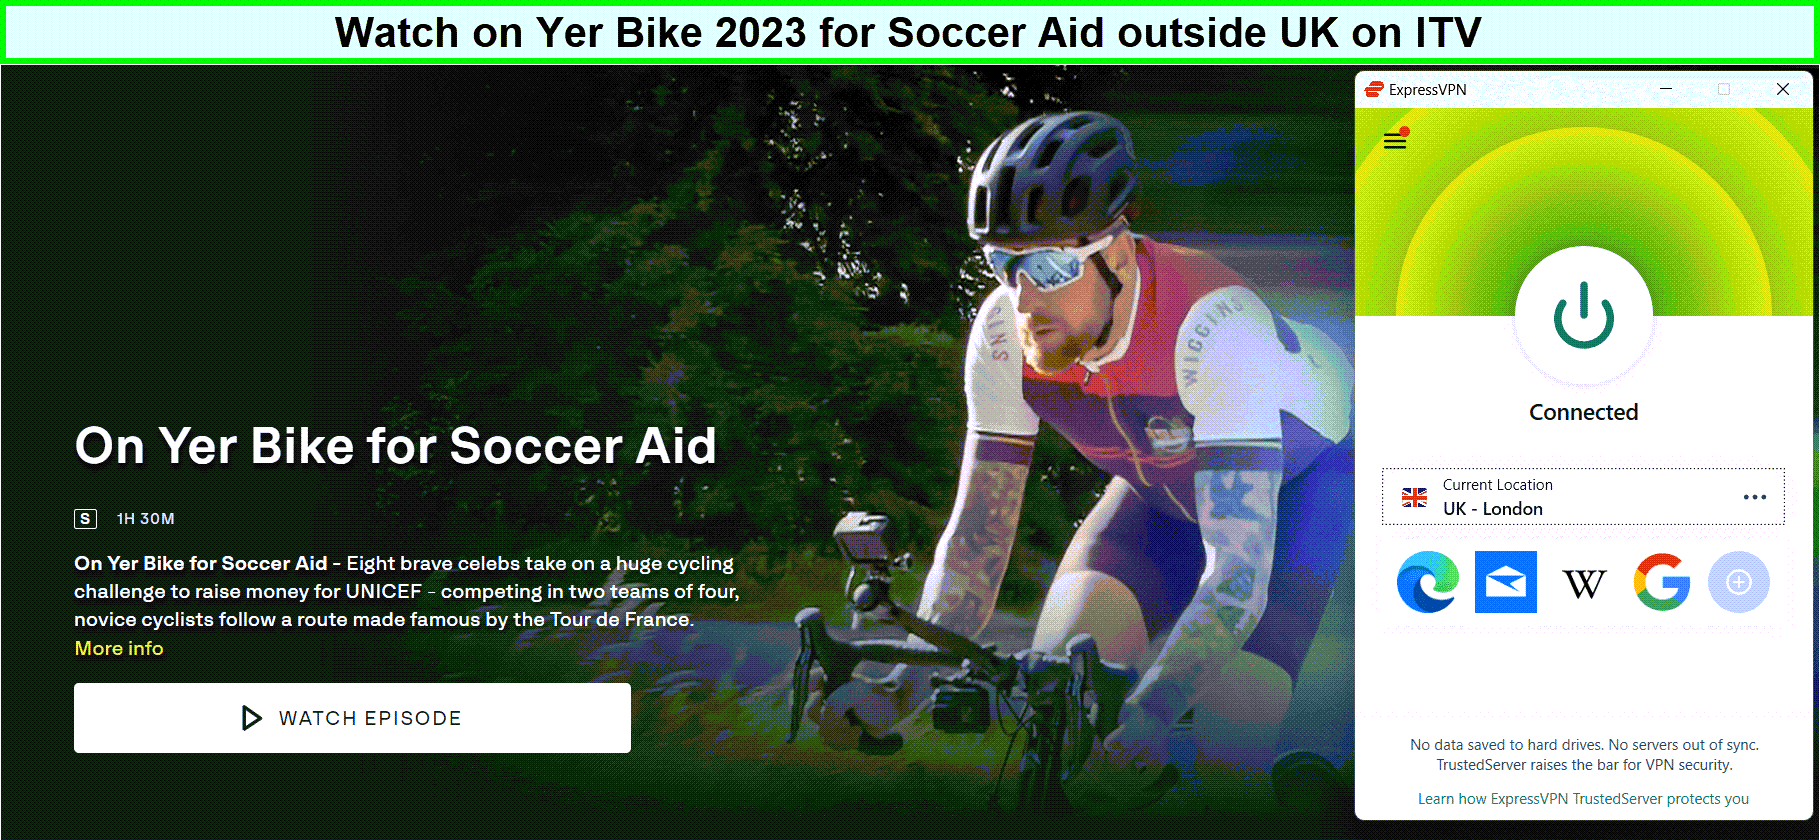 Watch-On-Yer-Bike-2023-for-Soccer-Aid-in-New Zealand-on-ITV-with-ExpressVPN